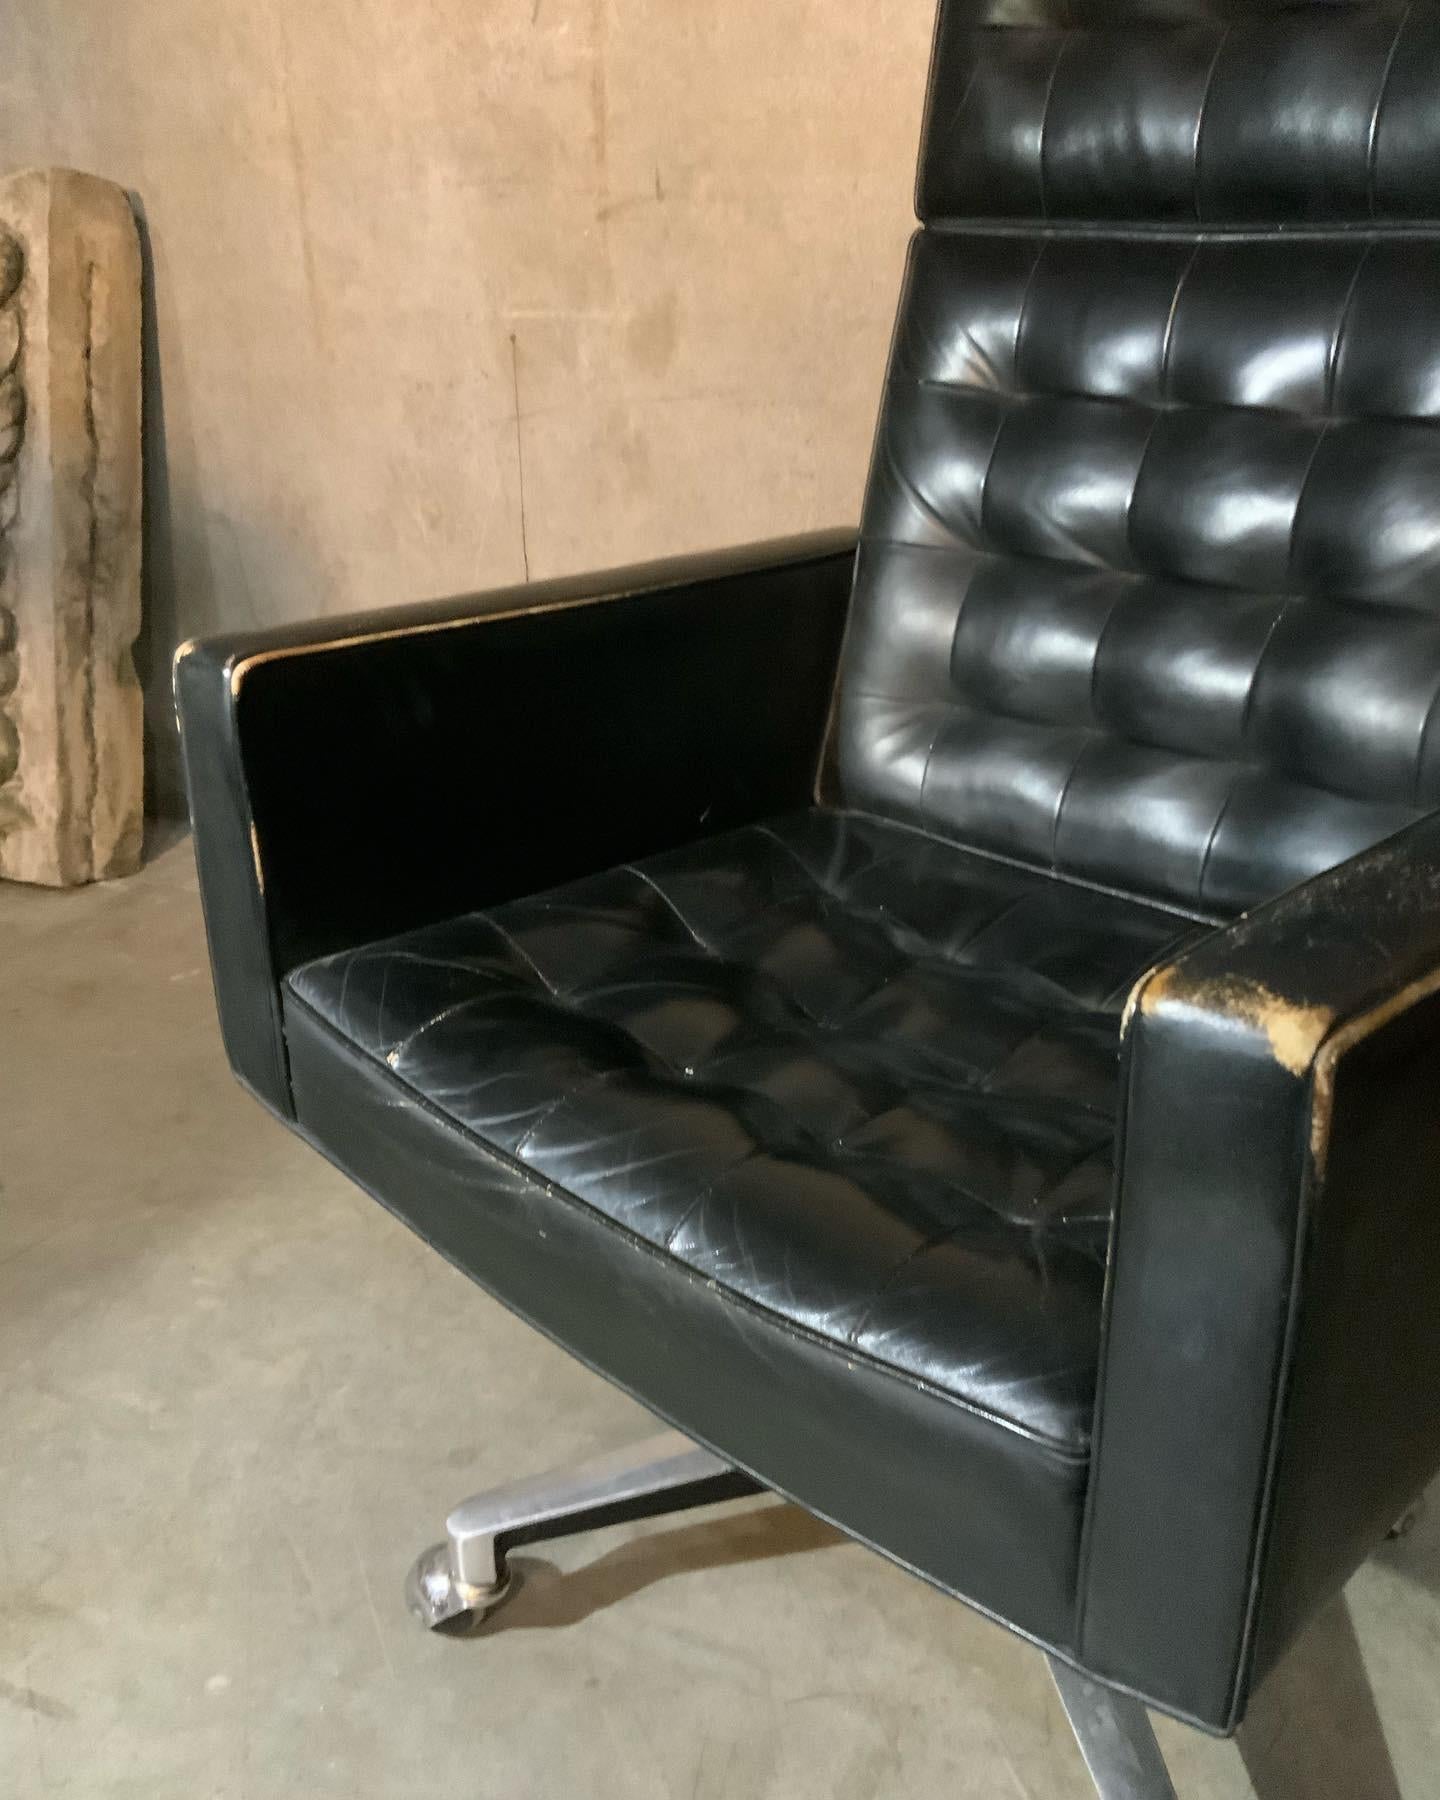 A great example of a rare production from Knoll in the late 50's early 60's by Vincent Cafiero.
Tags are on the piece. untouched full y functional condition.